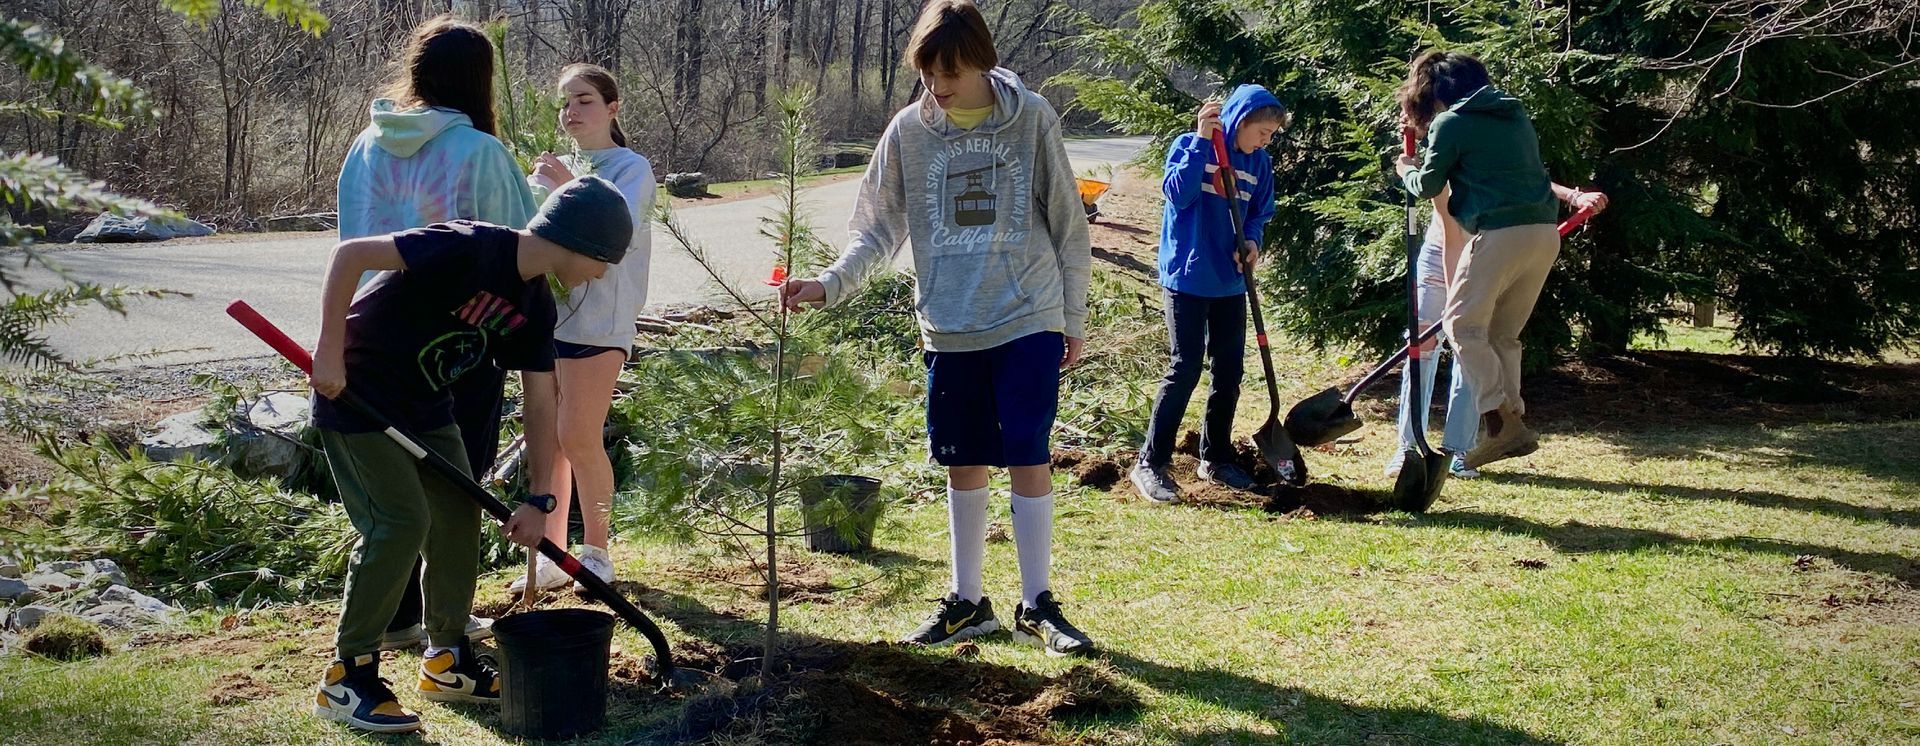 An image of six adolescent students with shovels working to plant small trees